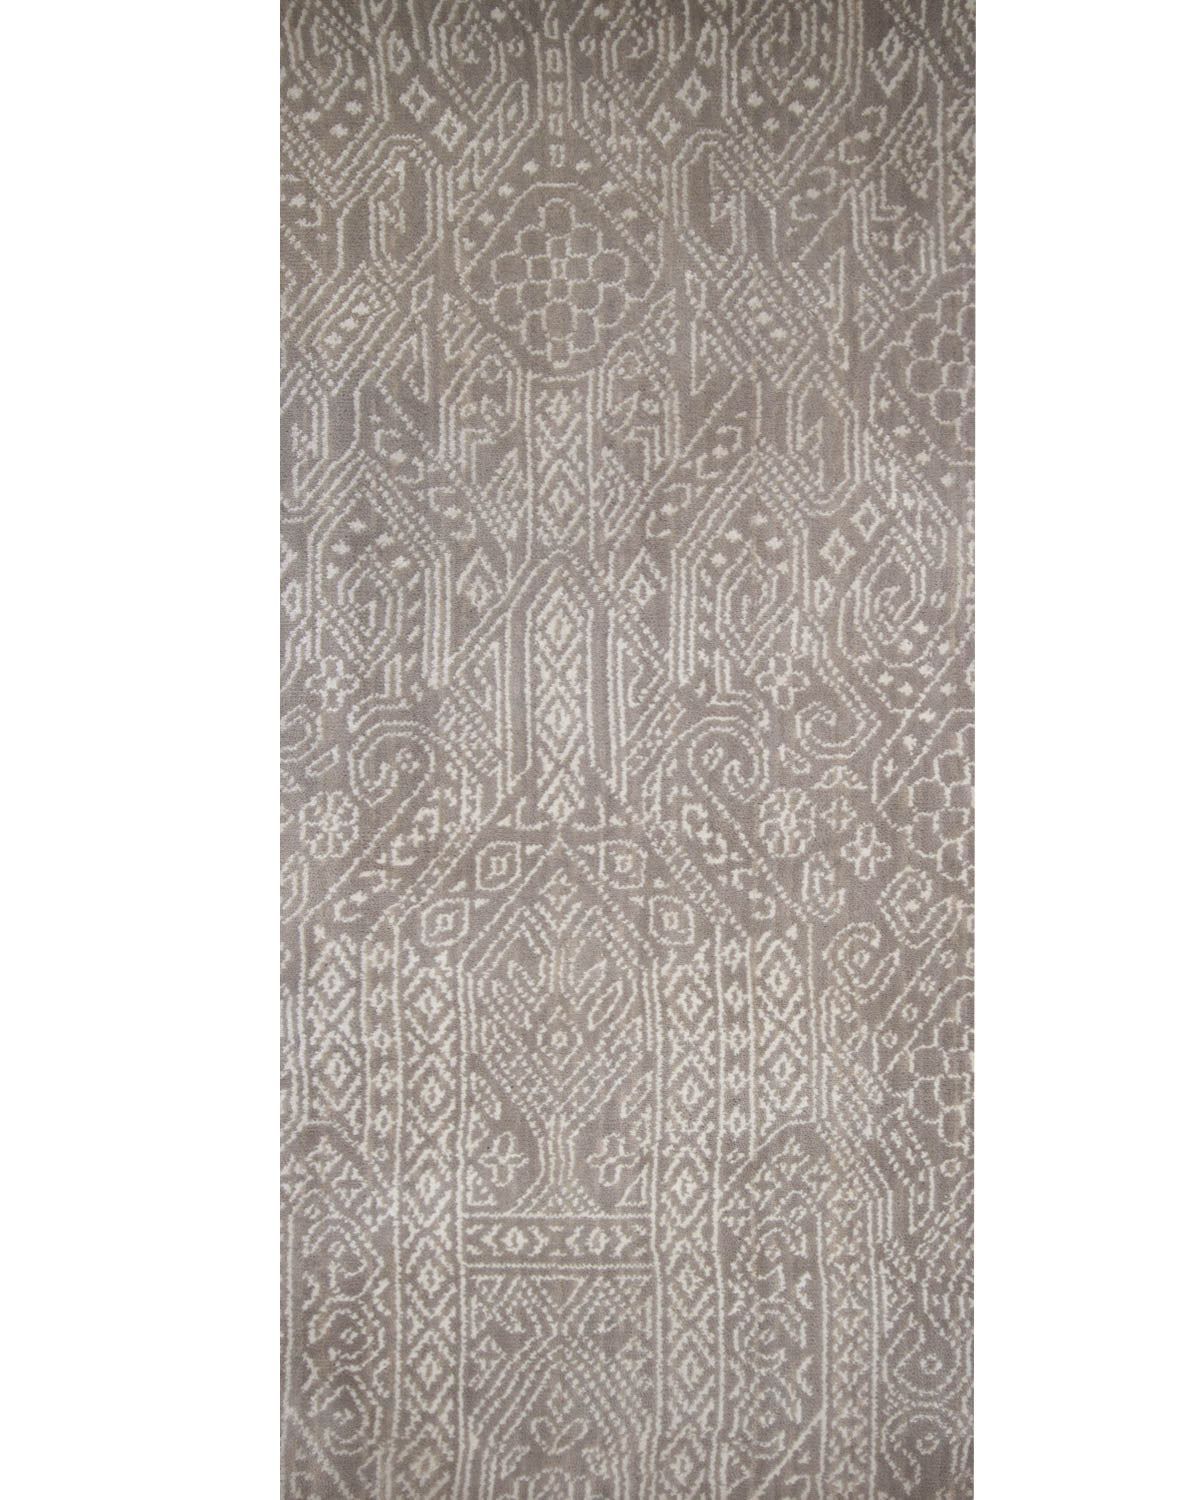 Grass Beige/Ivory Woven Runner Rug-Area rug for living room, dining area, and bedroom